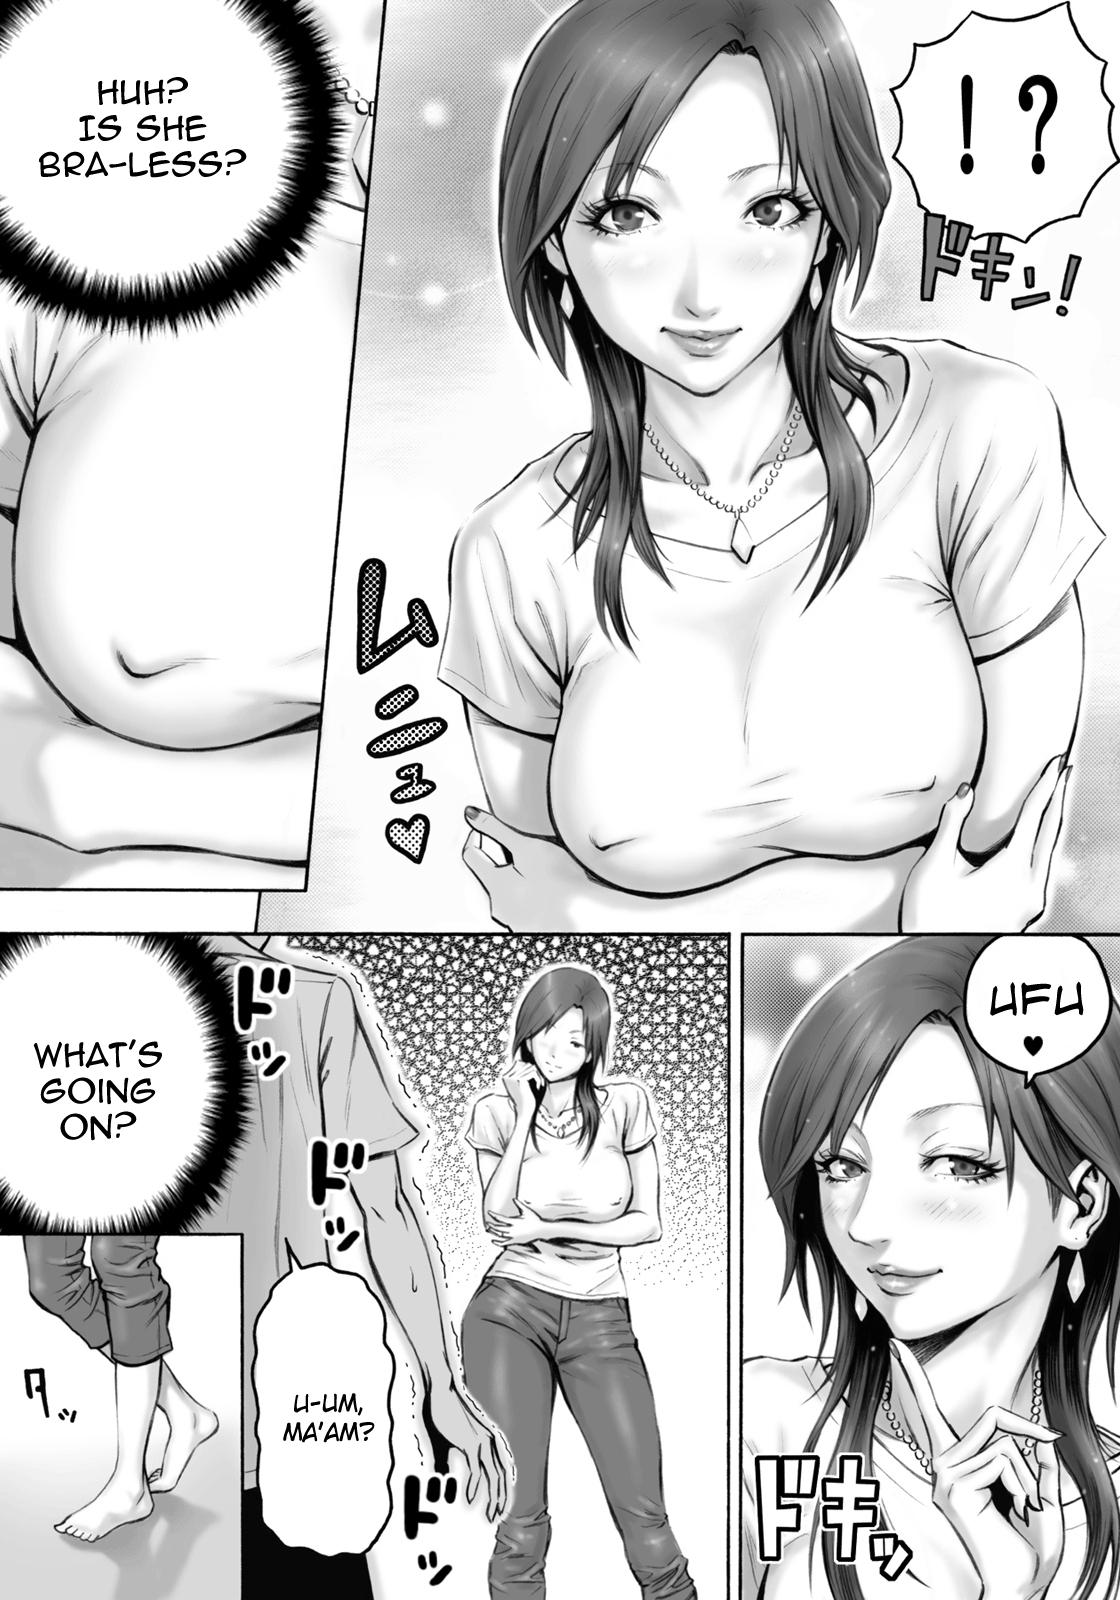 Butts Akogare no Kinjo no Oba-san ni Nengan no Tanetsuke | The Lady Down the Street Asked Me to Impregnate Her Fit - Page 8